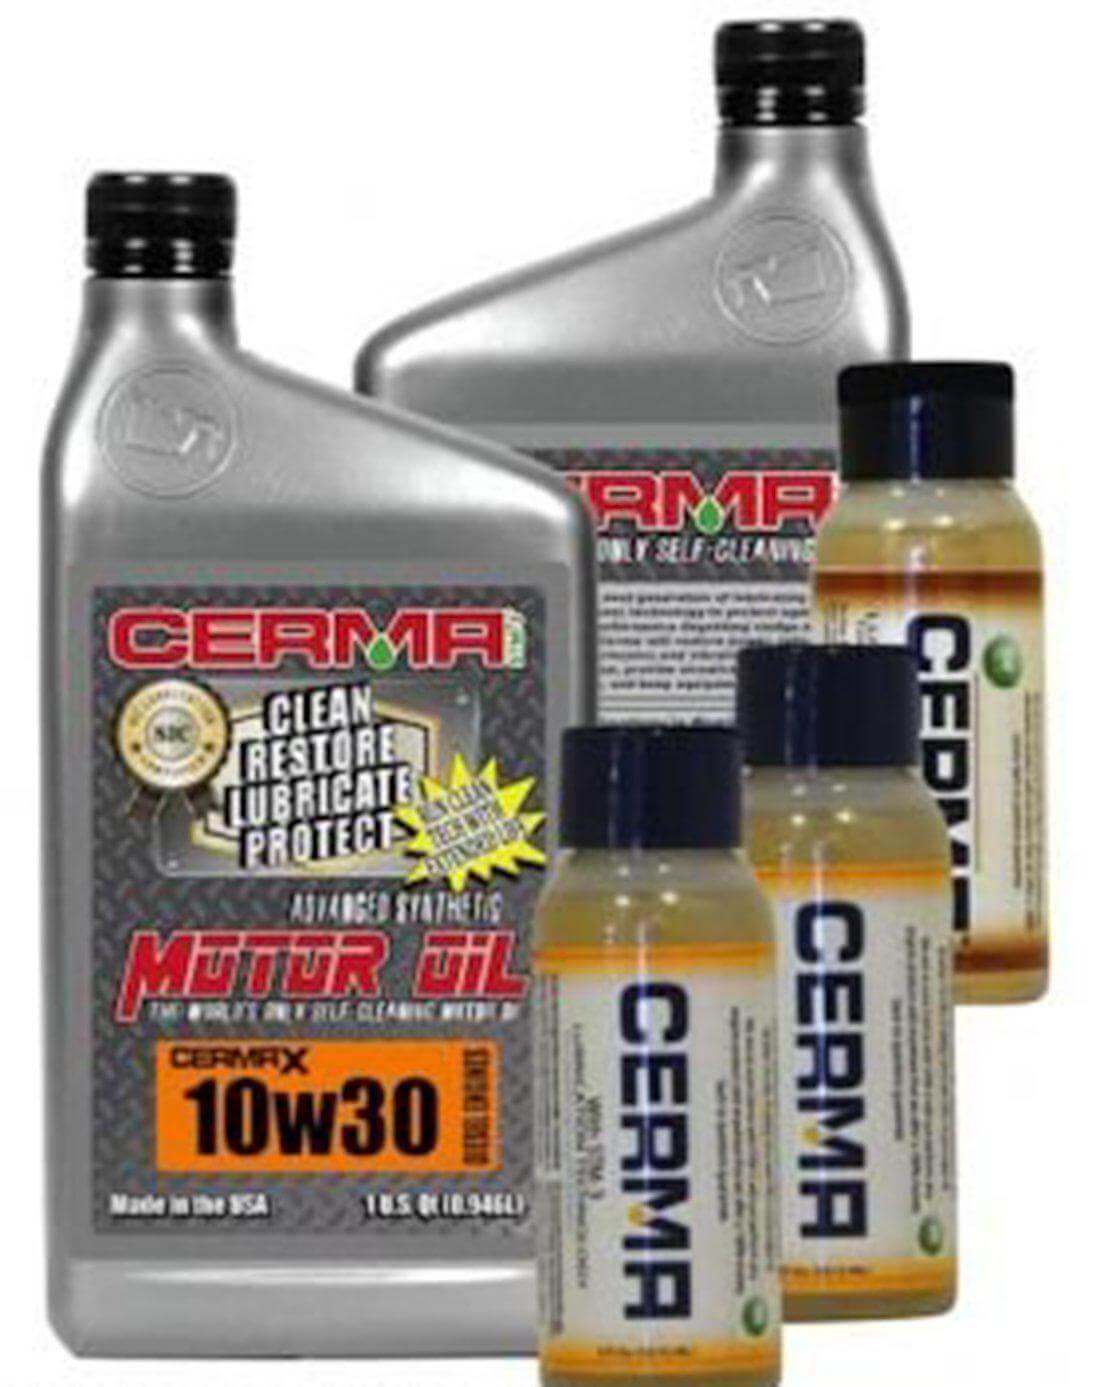 Cermax Diesel Ceramic Synthetic Oil Value Package for 3 To 4.8 Liter Engines at $269.5 only from cermatreatment.com